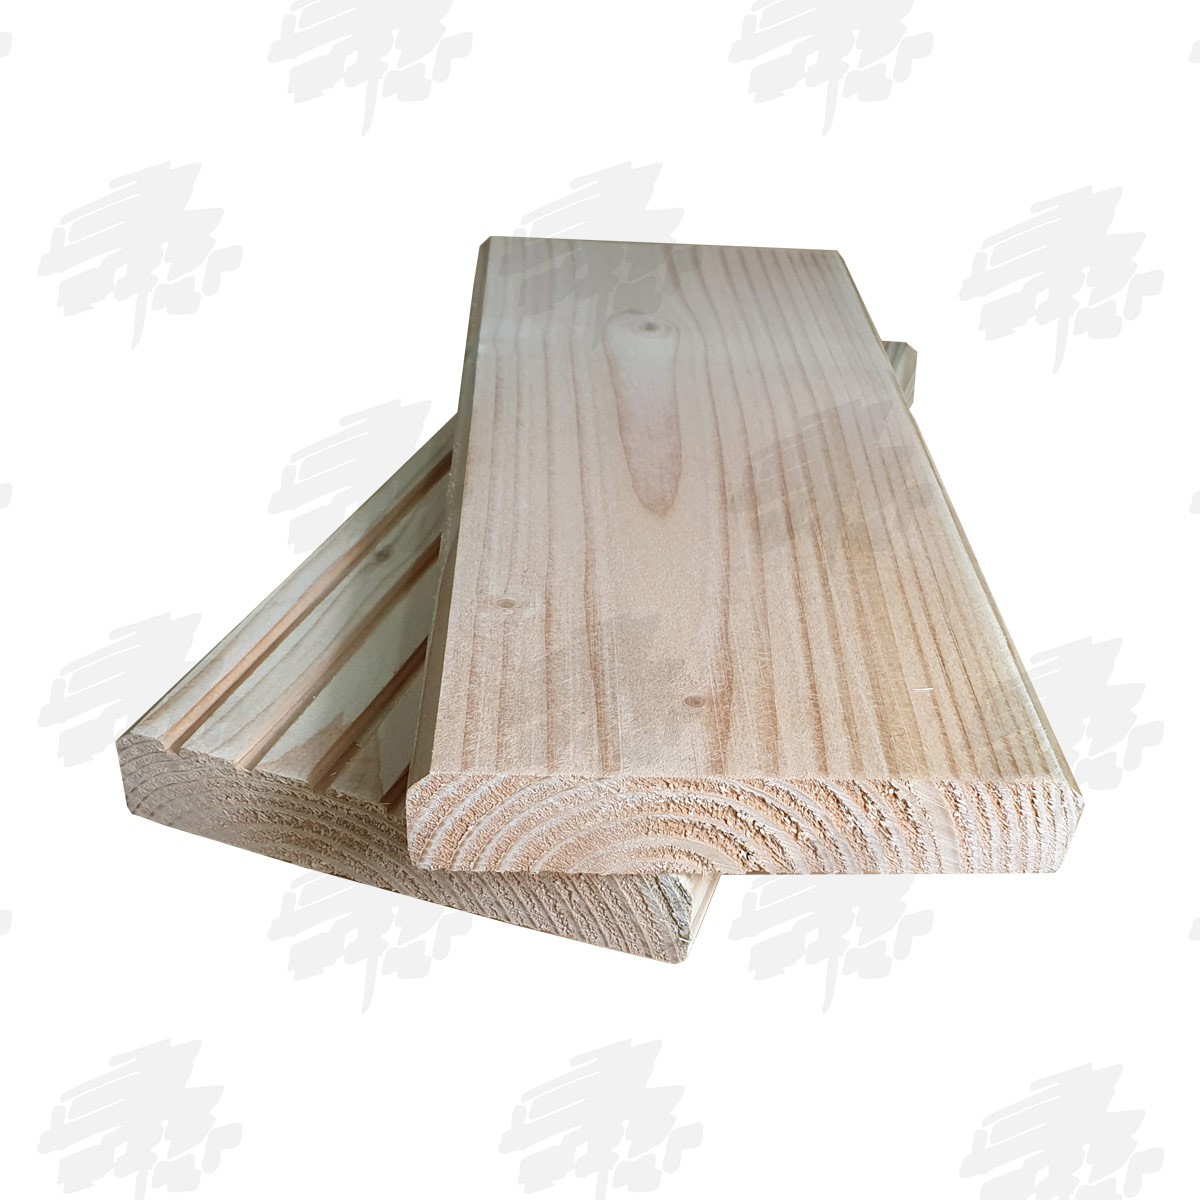 Untreated English Larch Decking (145x28mm)